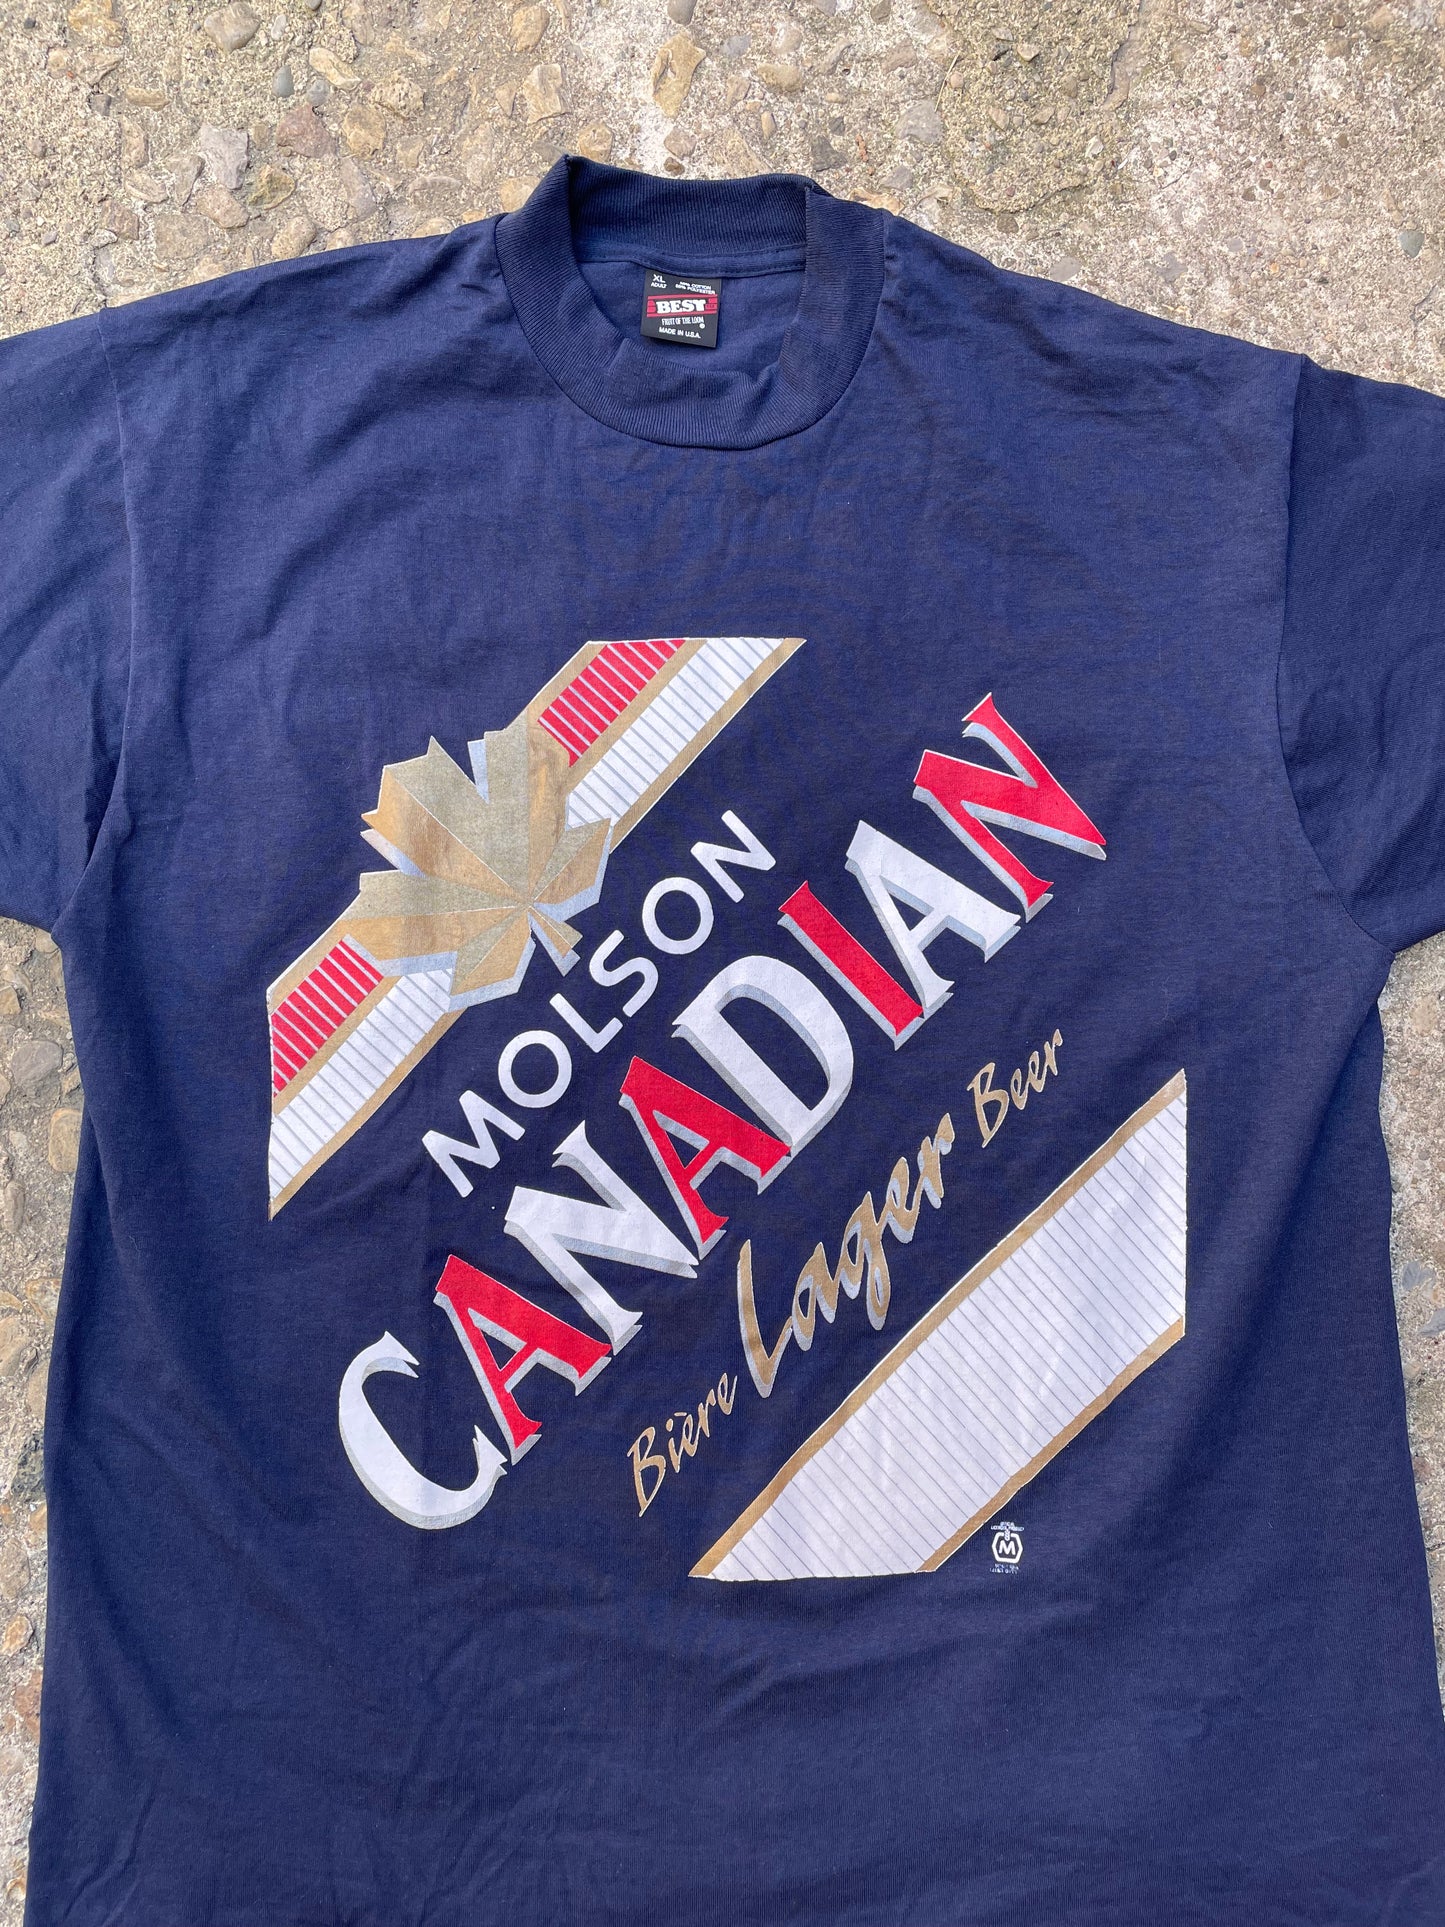 1990's Molson Canadian Beer Graphic T-Shirt - XL